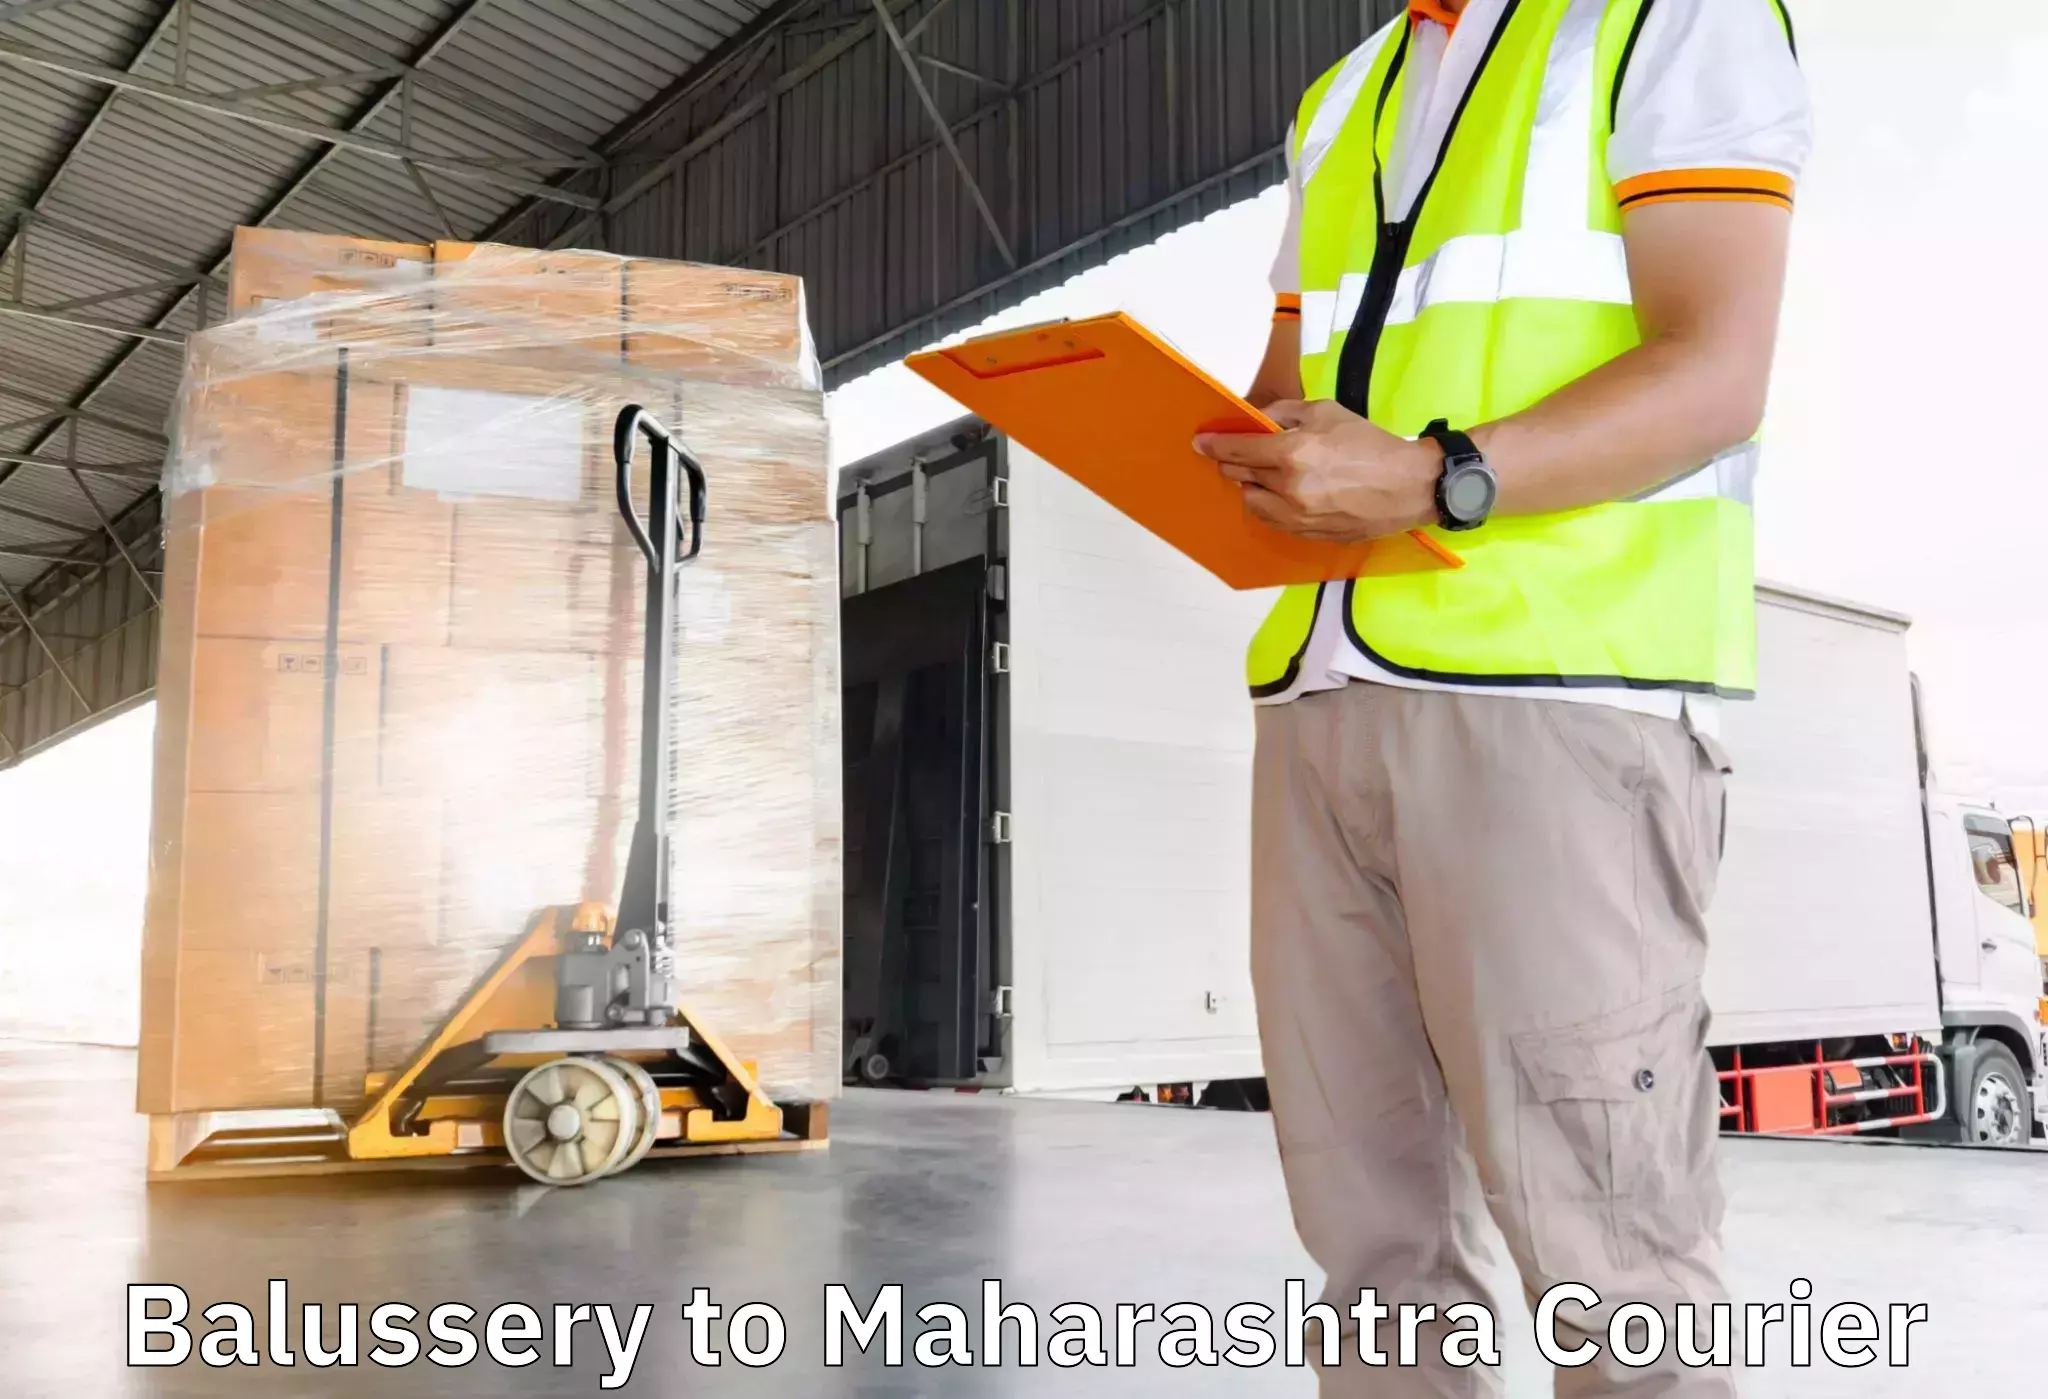 Furniture transport services Balussery to Dadar